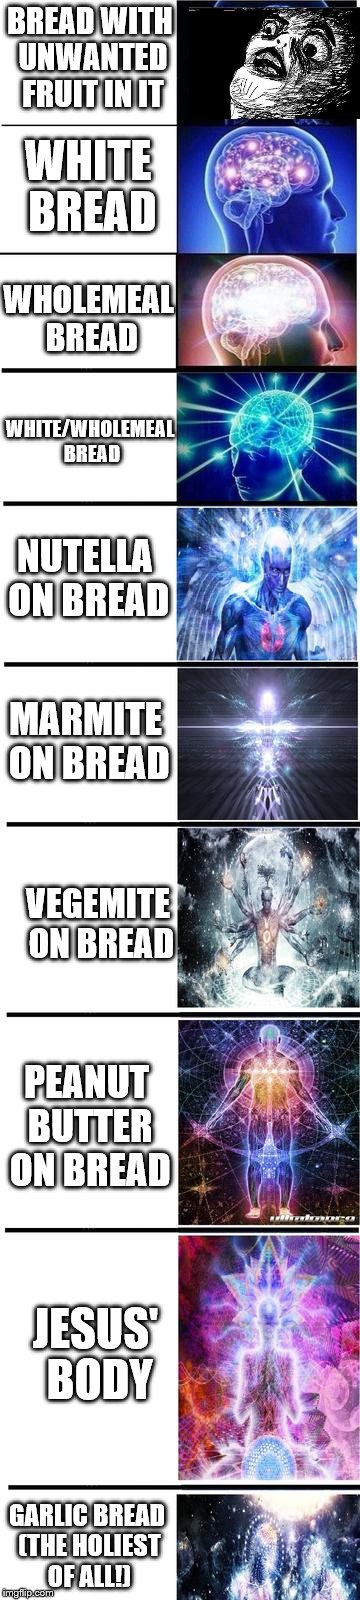 The Bread OF LIFE | BREAD WITH UNWANTED FRUIT IN IT; WHITE BREAD; WHOLEMEAL BREAD; WHITE/WHOLEMEAL BREAD; NUTELLA ON BREAD; MARMITE ON BREAD; VEGEMITE ON BREAD; PEANUT BUTTER ON BREAD; JESUS' BODY; GARLIC BREAD (THE HOLIEST OF ALL!) | image tagged in expanding brain,memes,dank memes,garlic bread,bread | made w/ Imgflip meme maker